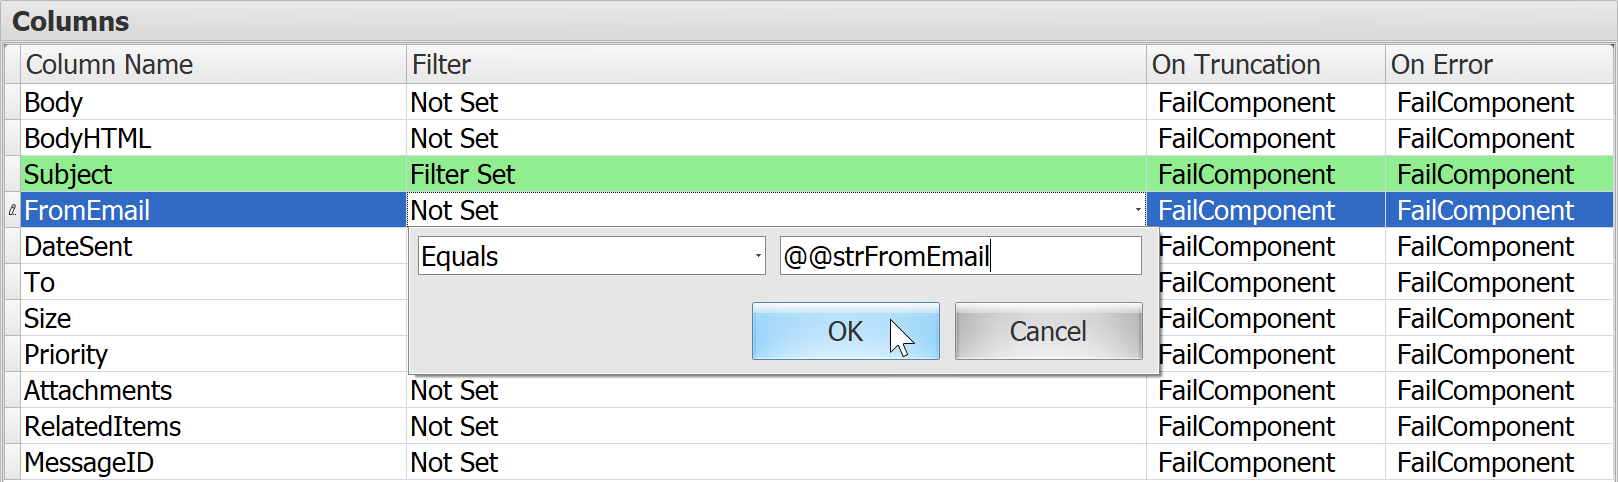 Task Factory Email Source Variables example